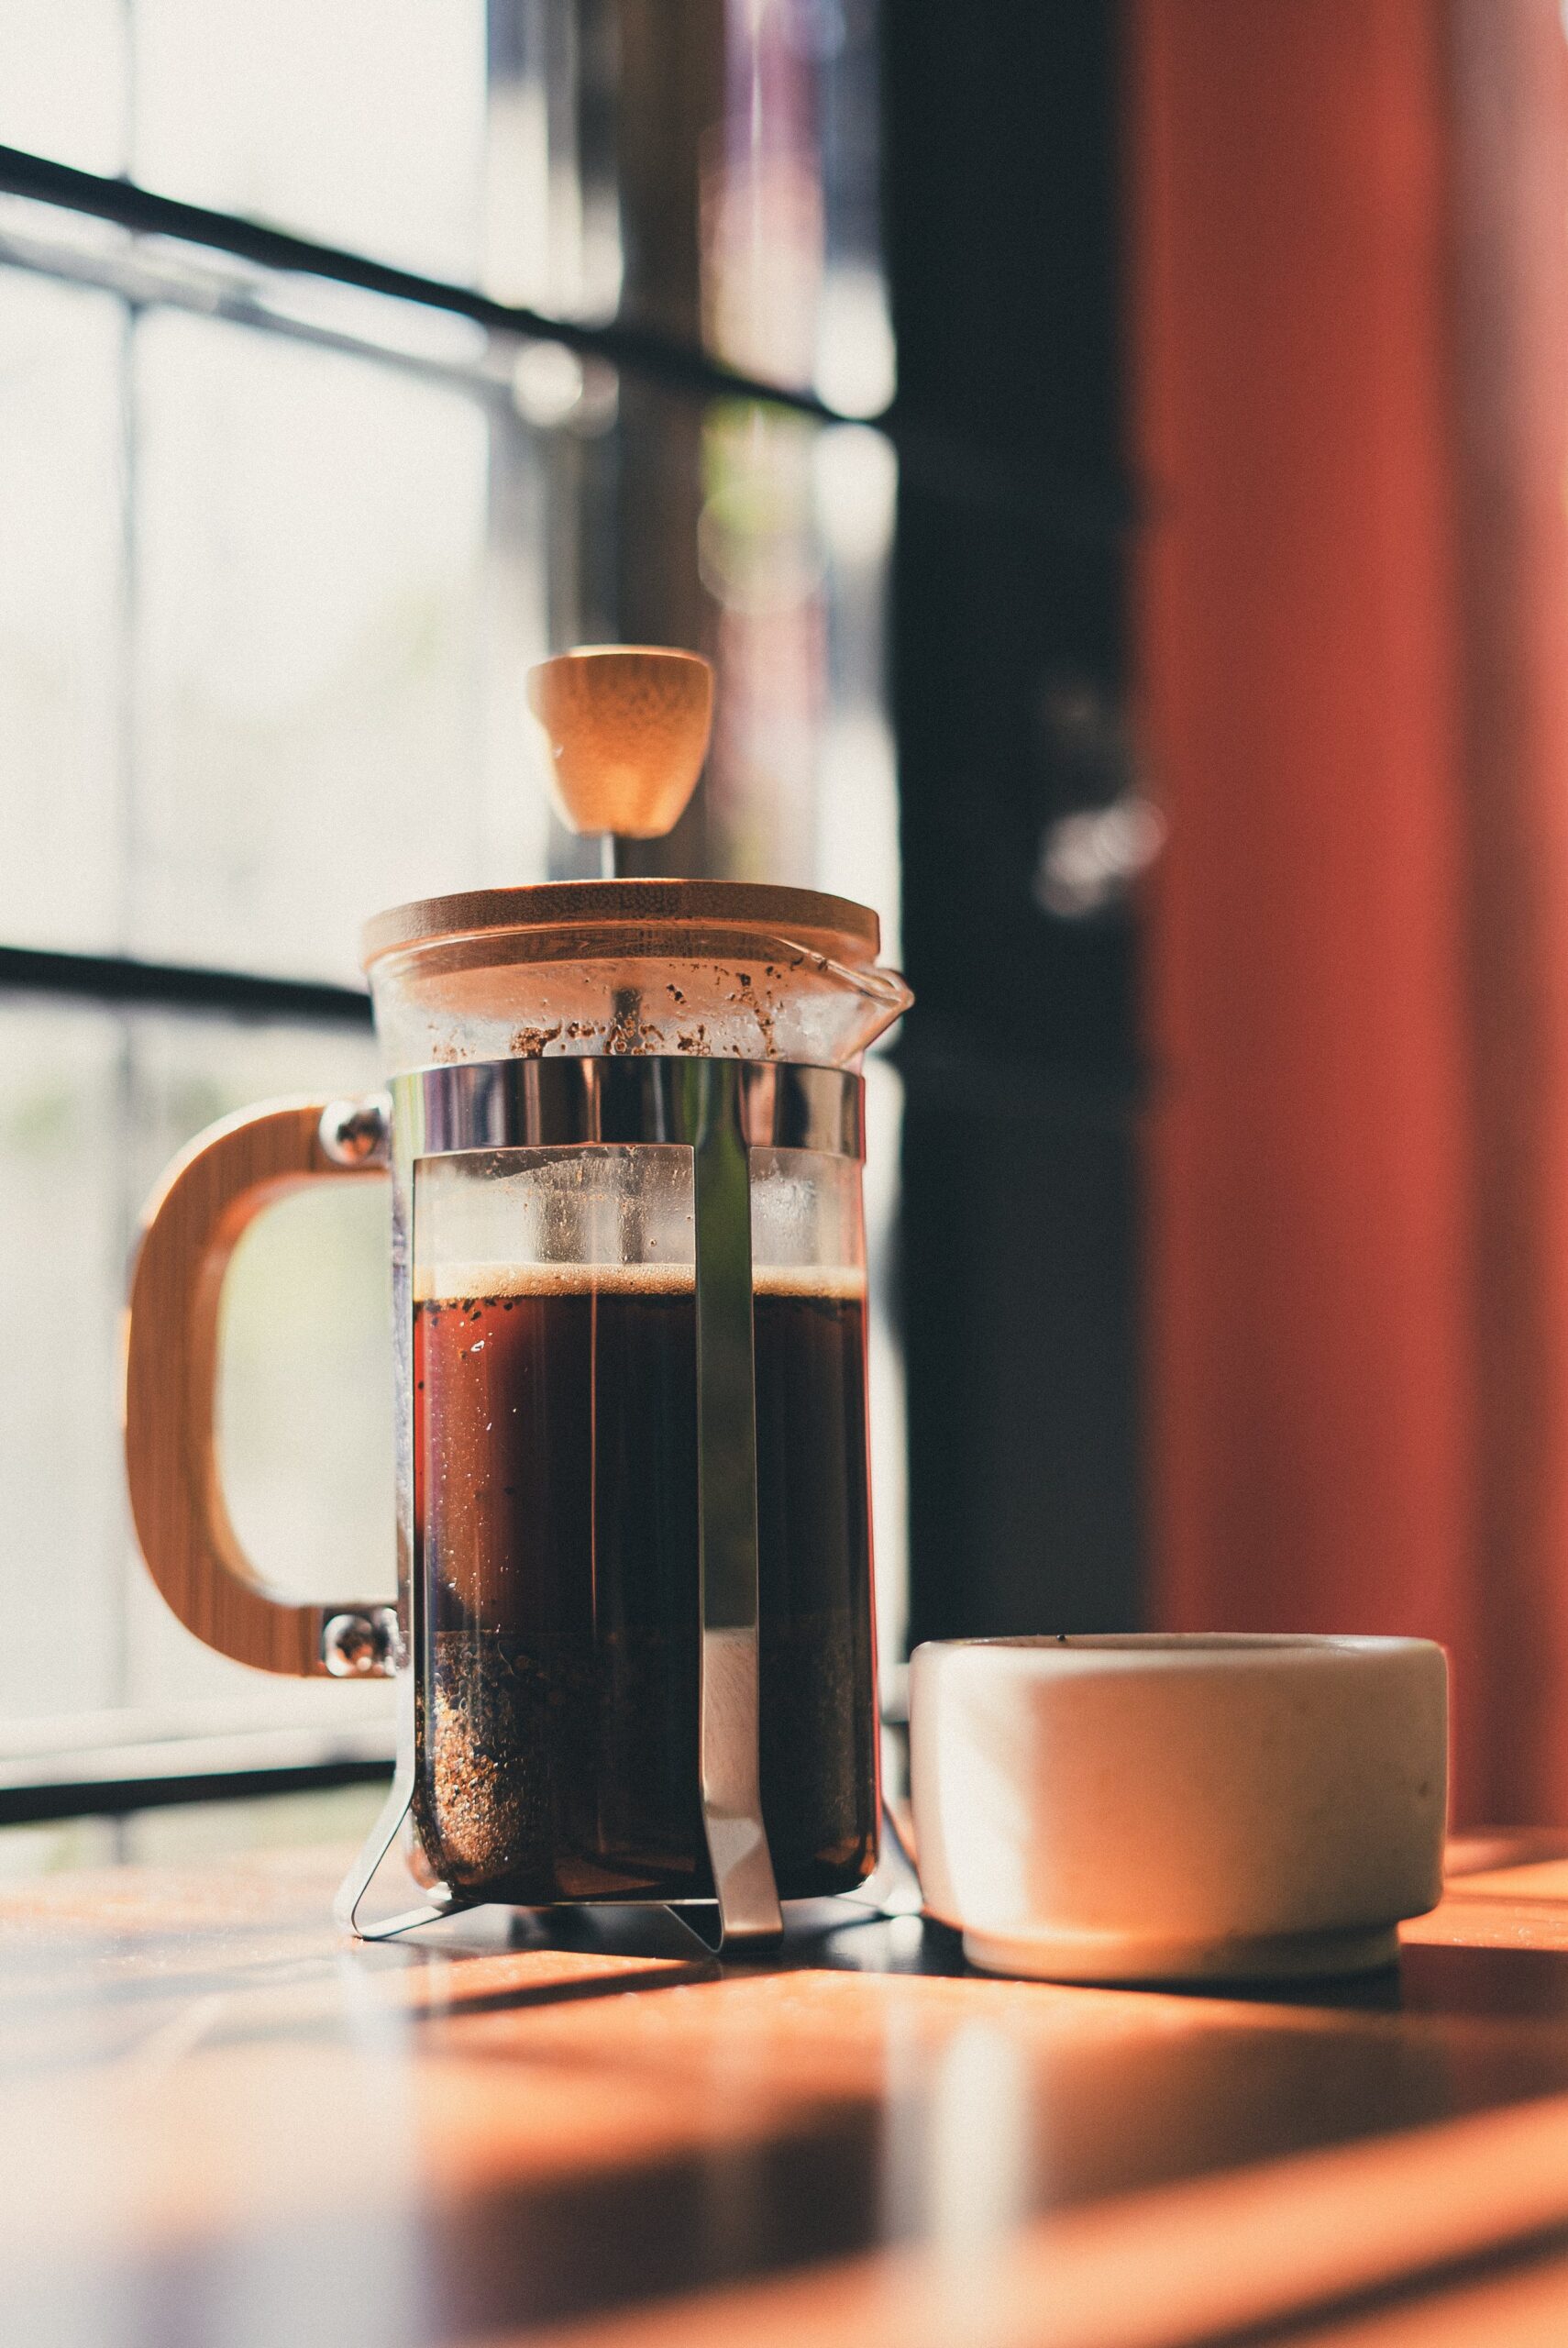 Why French Press Makes the Best Coffee